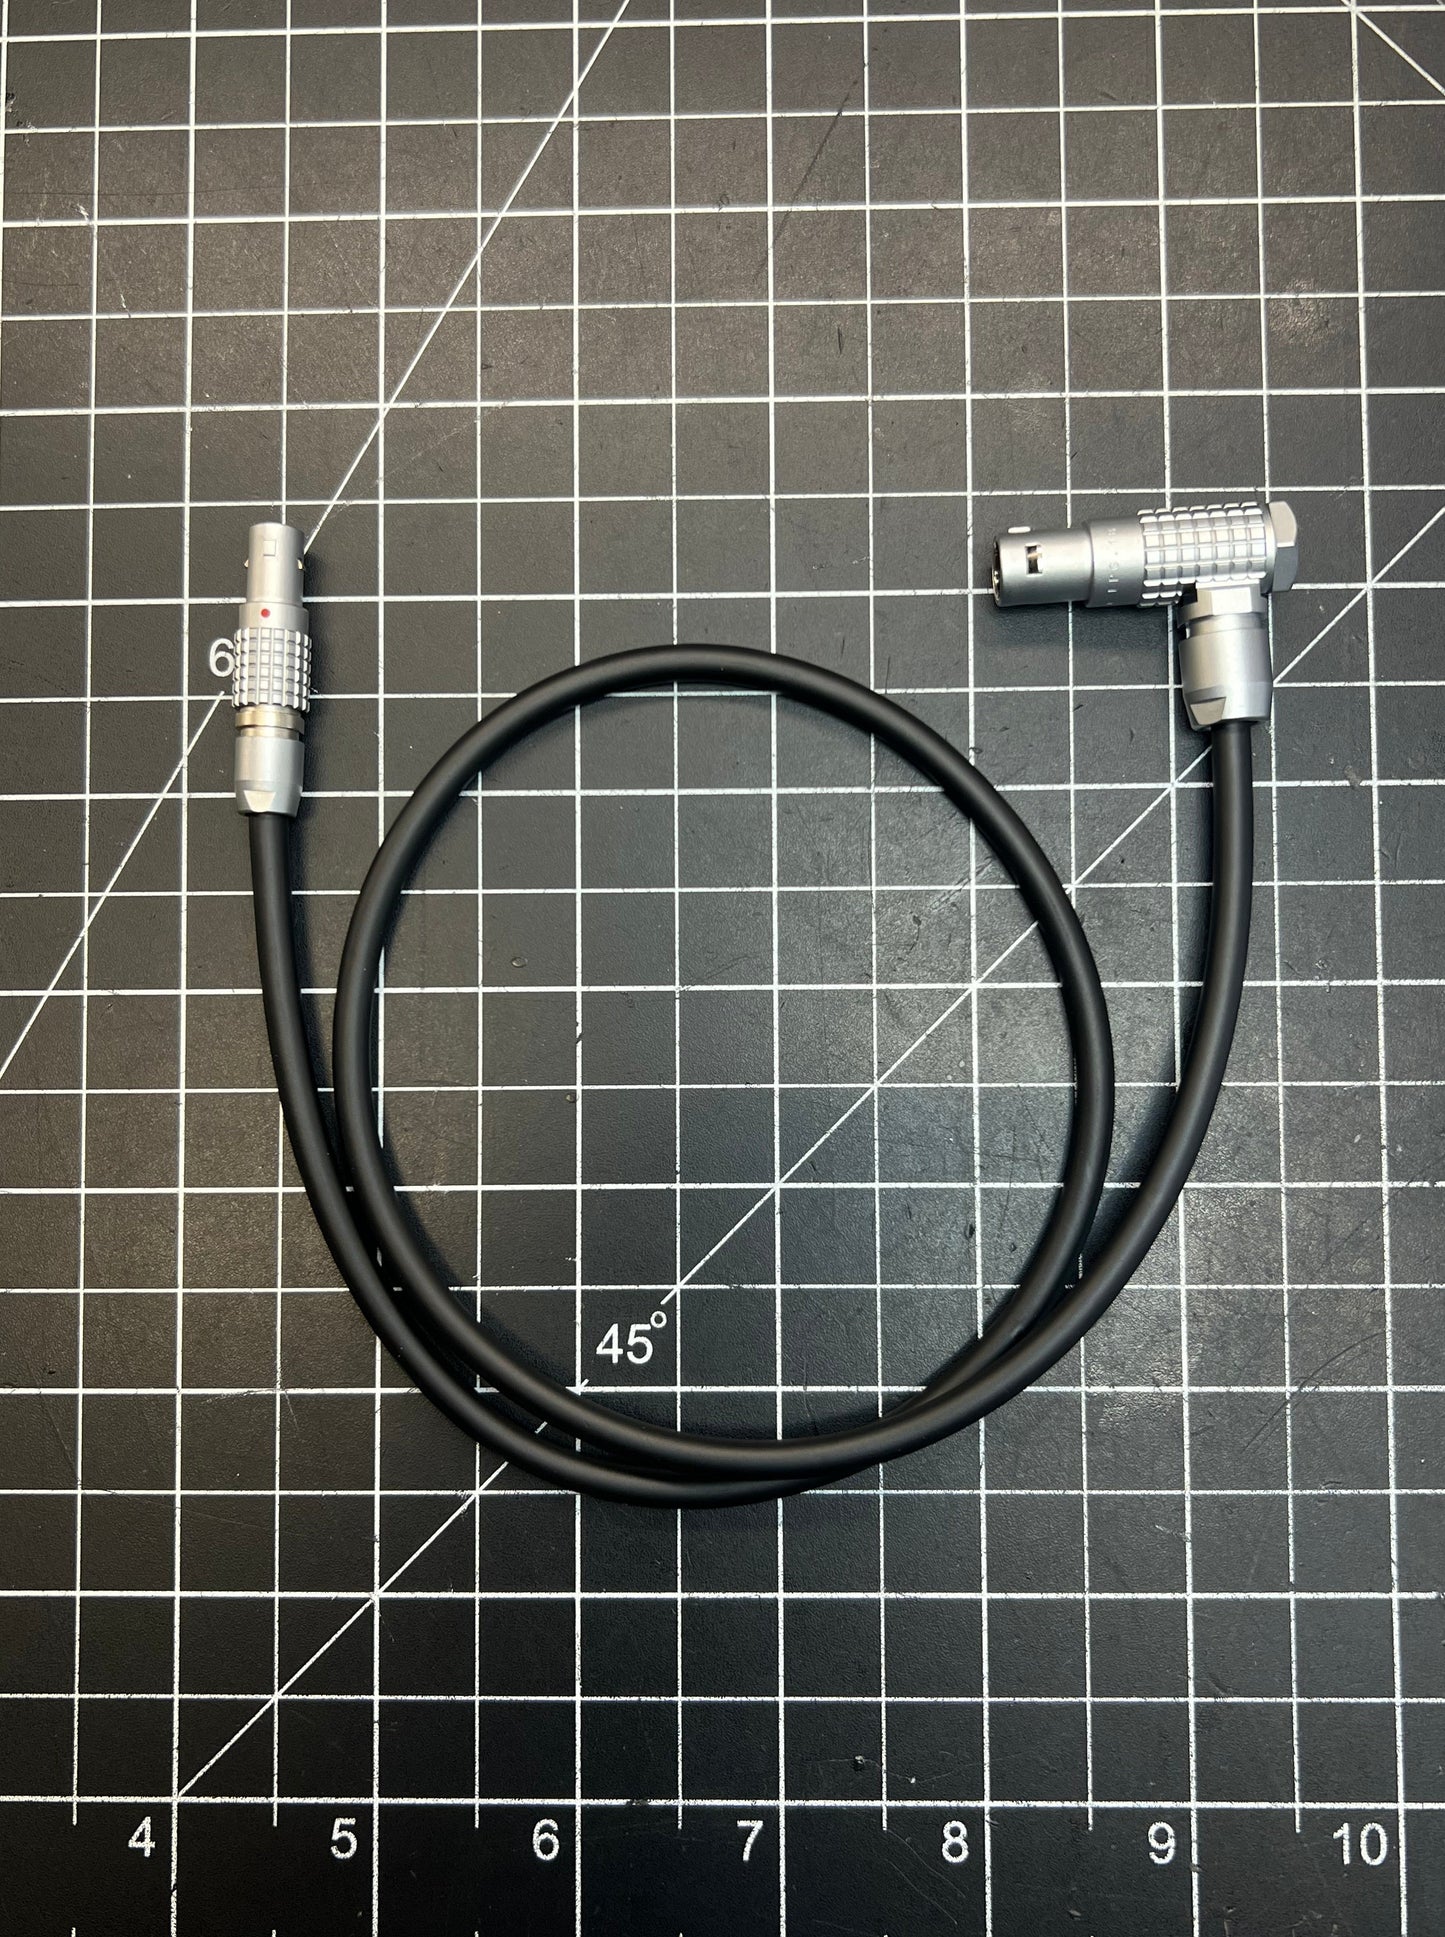 Wave1 Power Cables